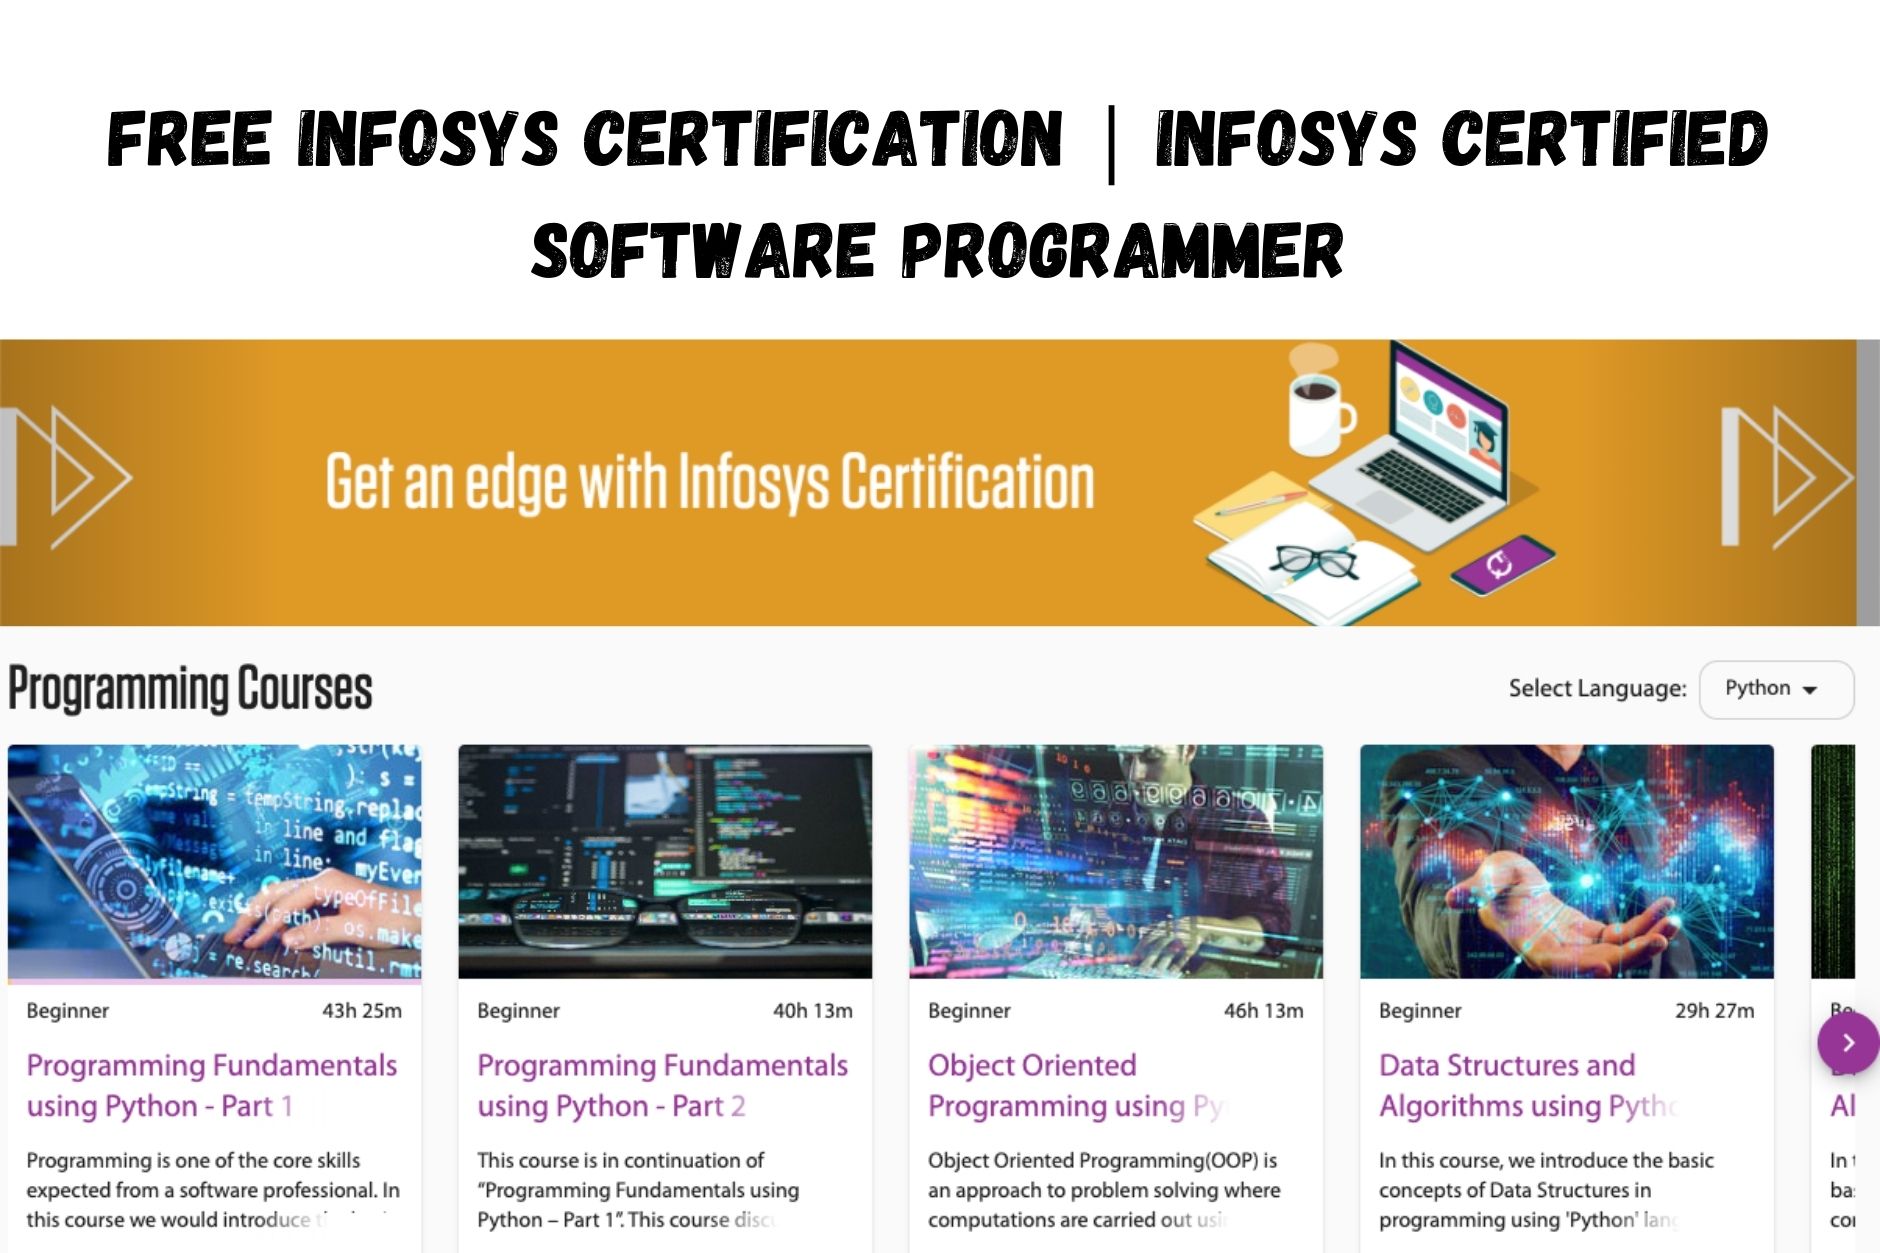 Free Infosys certification | Infosys Certified Software Programmer